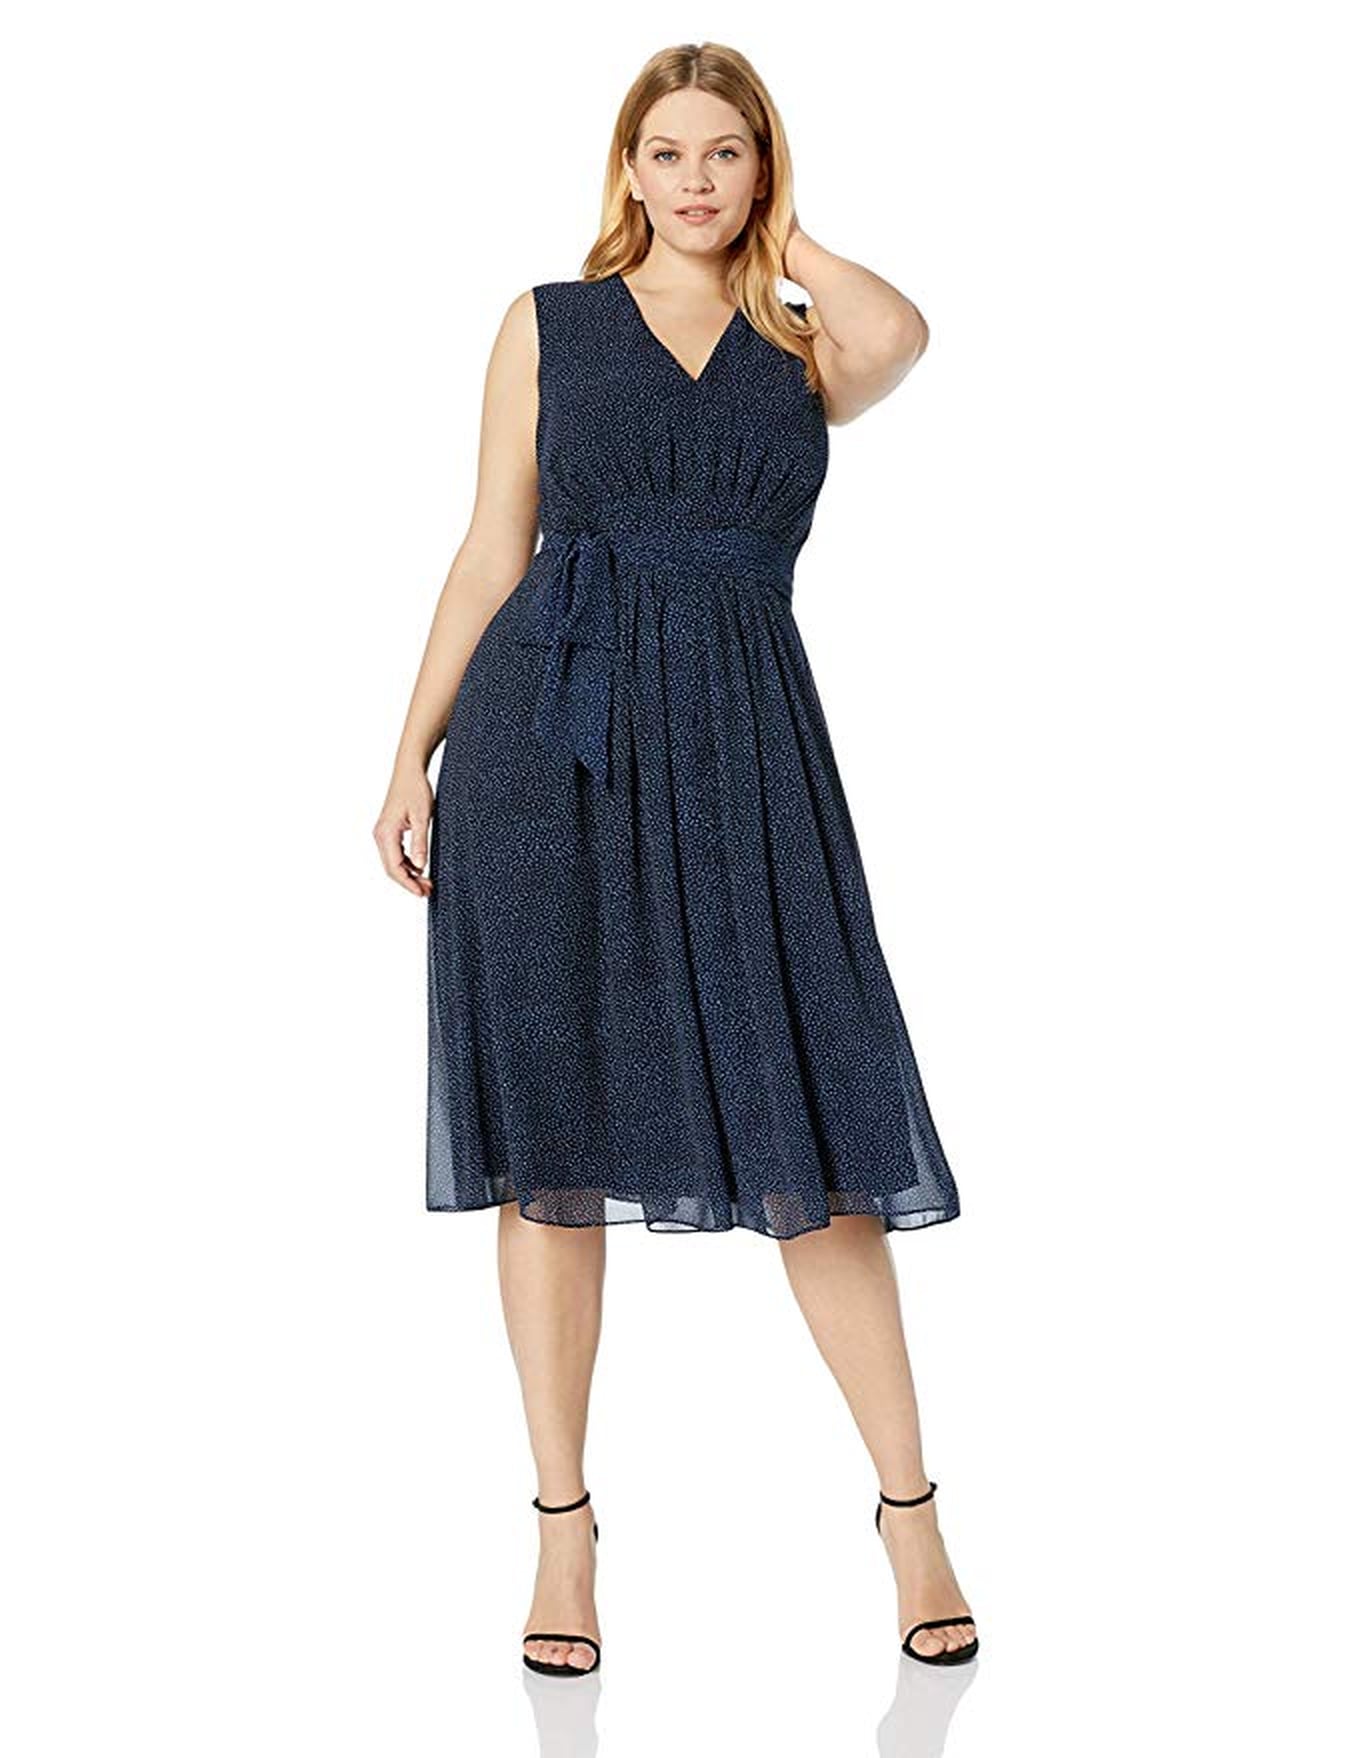 These are the Best Plus-Size Dresses on Amazon | POPSUGAR Fashion